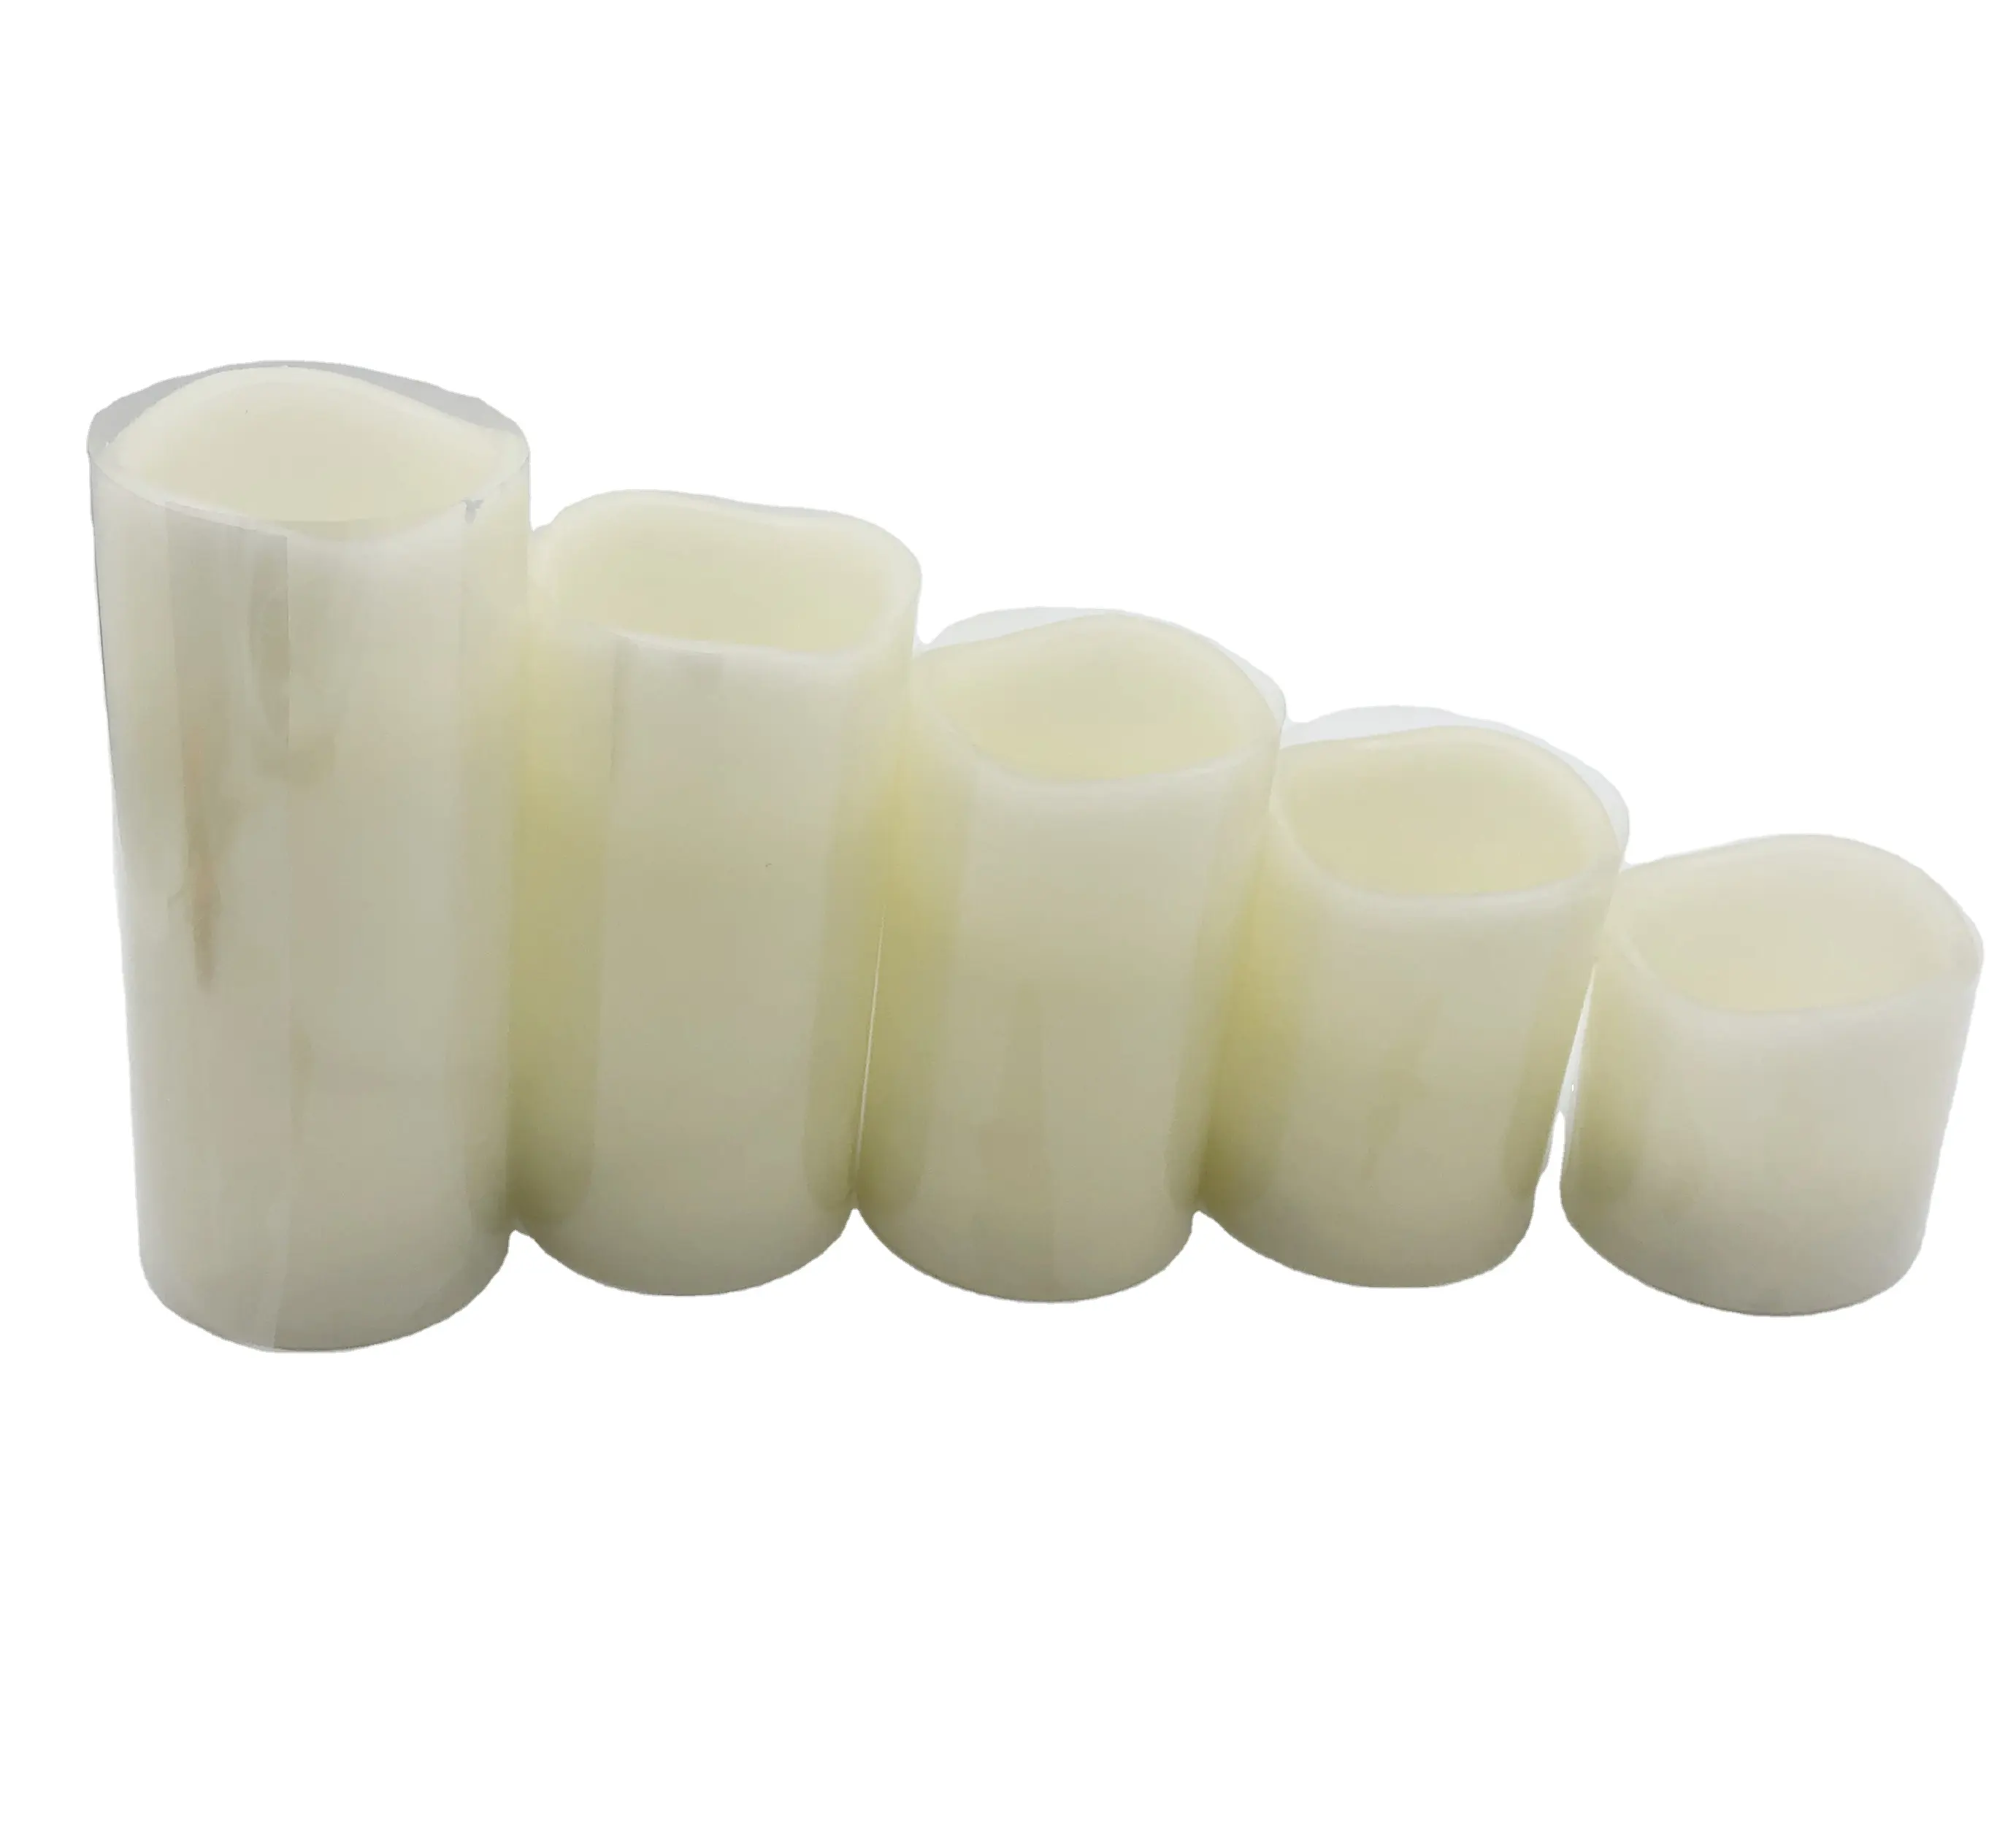 Flameless Led Candle Sets 2021 New Arrivals Garden Long And Thin Cylindrical Ivory LED Flameless Candle 5 Sets